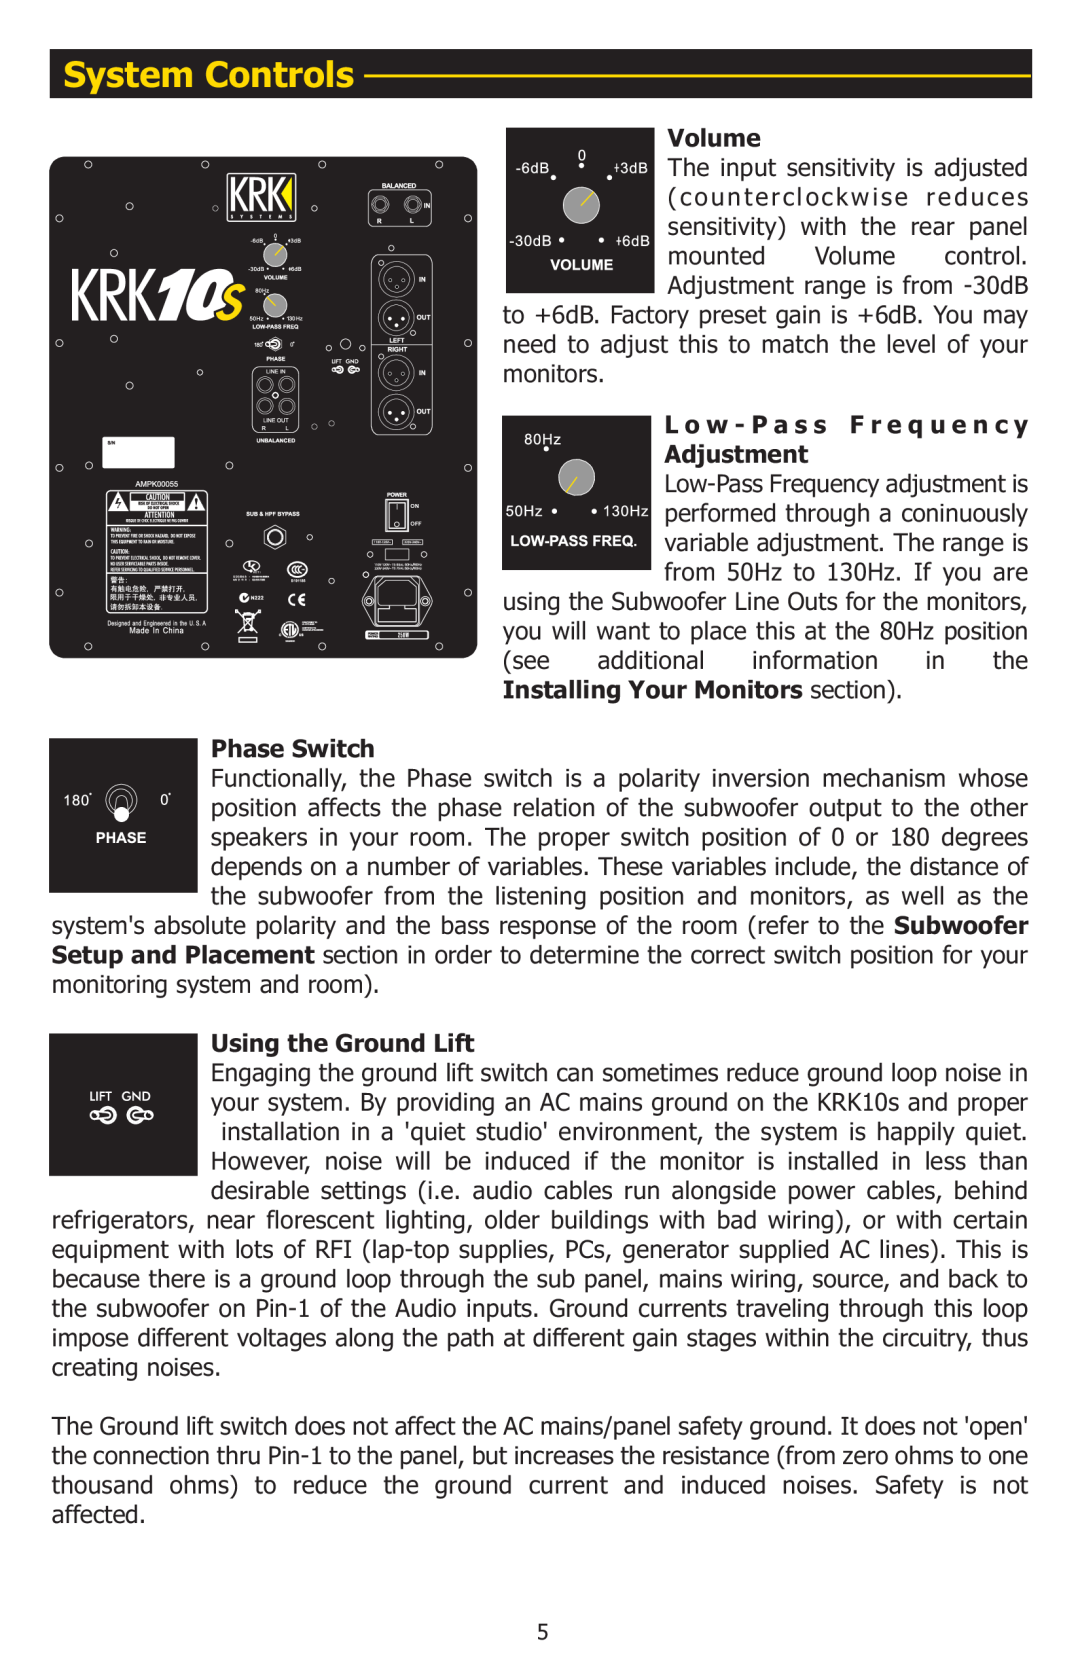 KRK 10S manual System Controls, Volume, L o w-Pas s Fr equ ency Adjustment, Phase Switch, Using the Ground Lift 